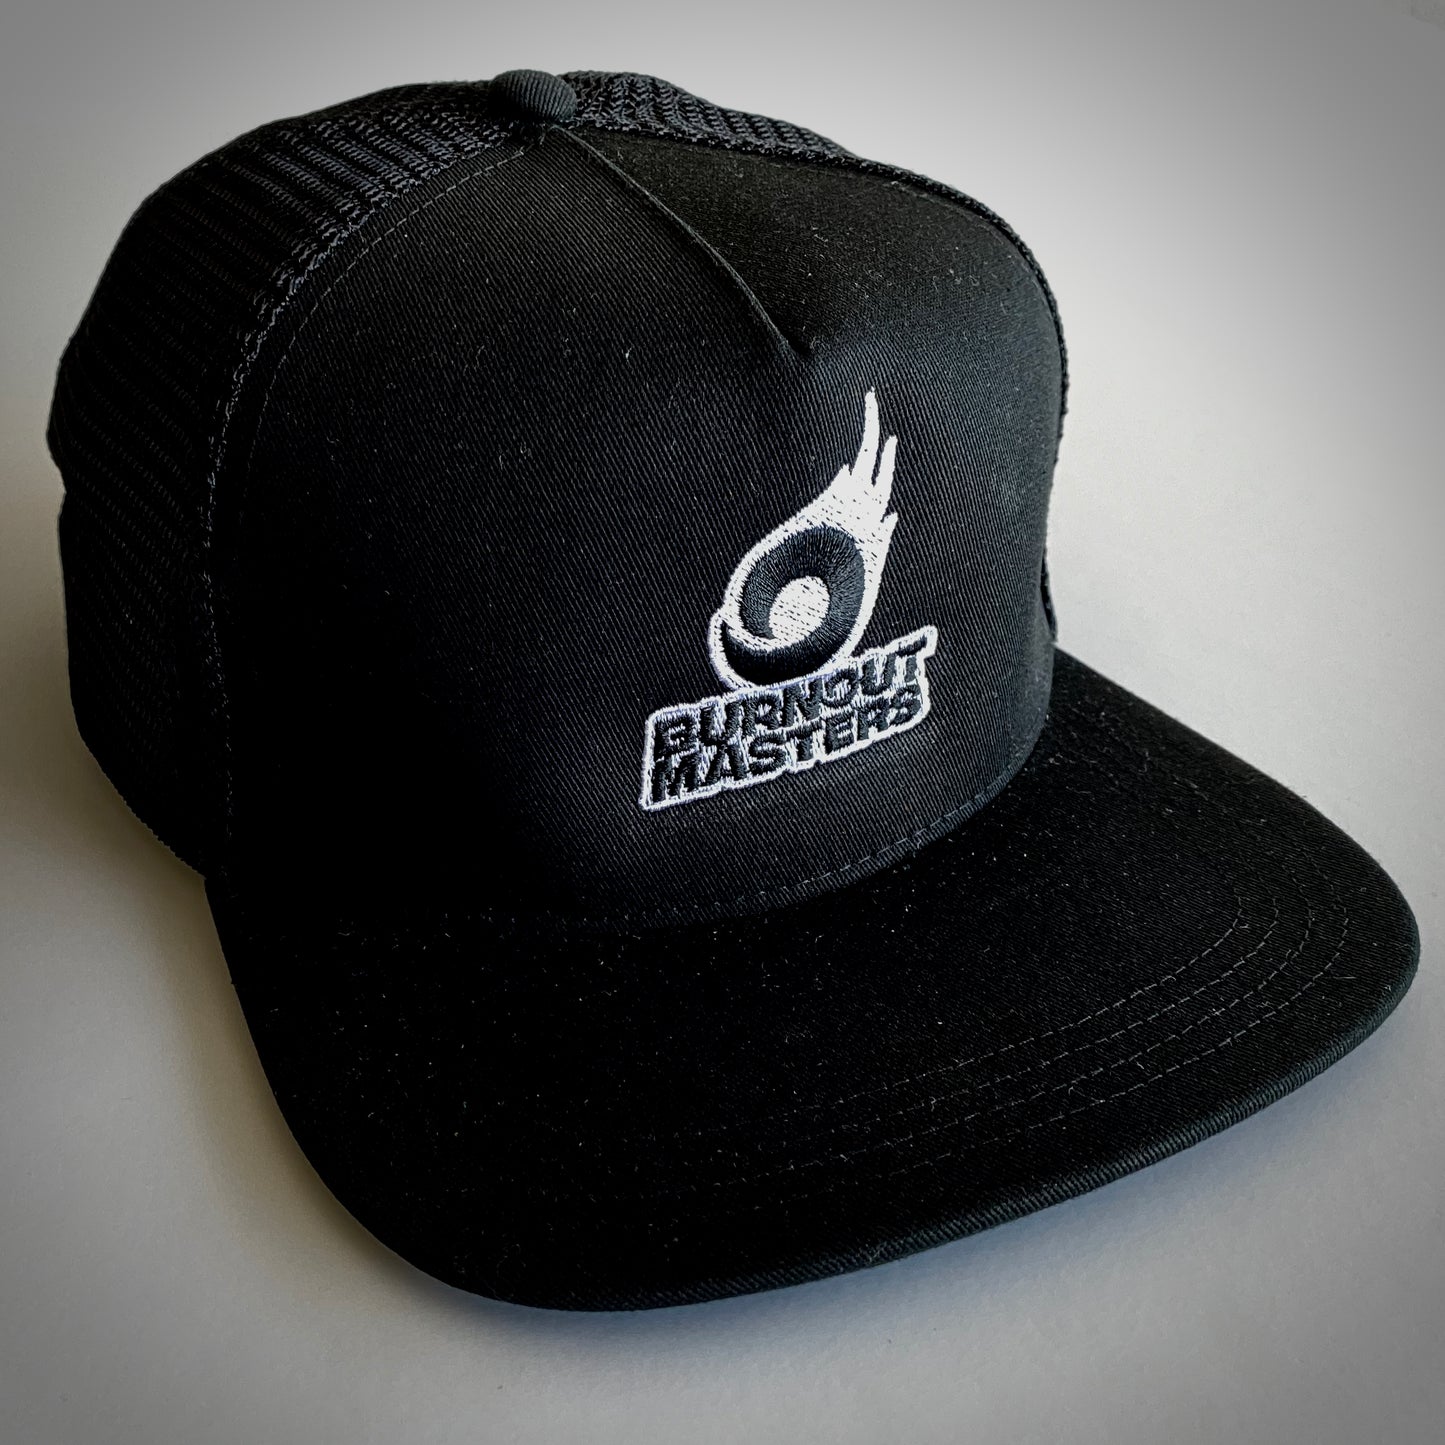 BURNOUT MASTERS Limited Edition Embroidered Cap